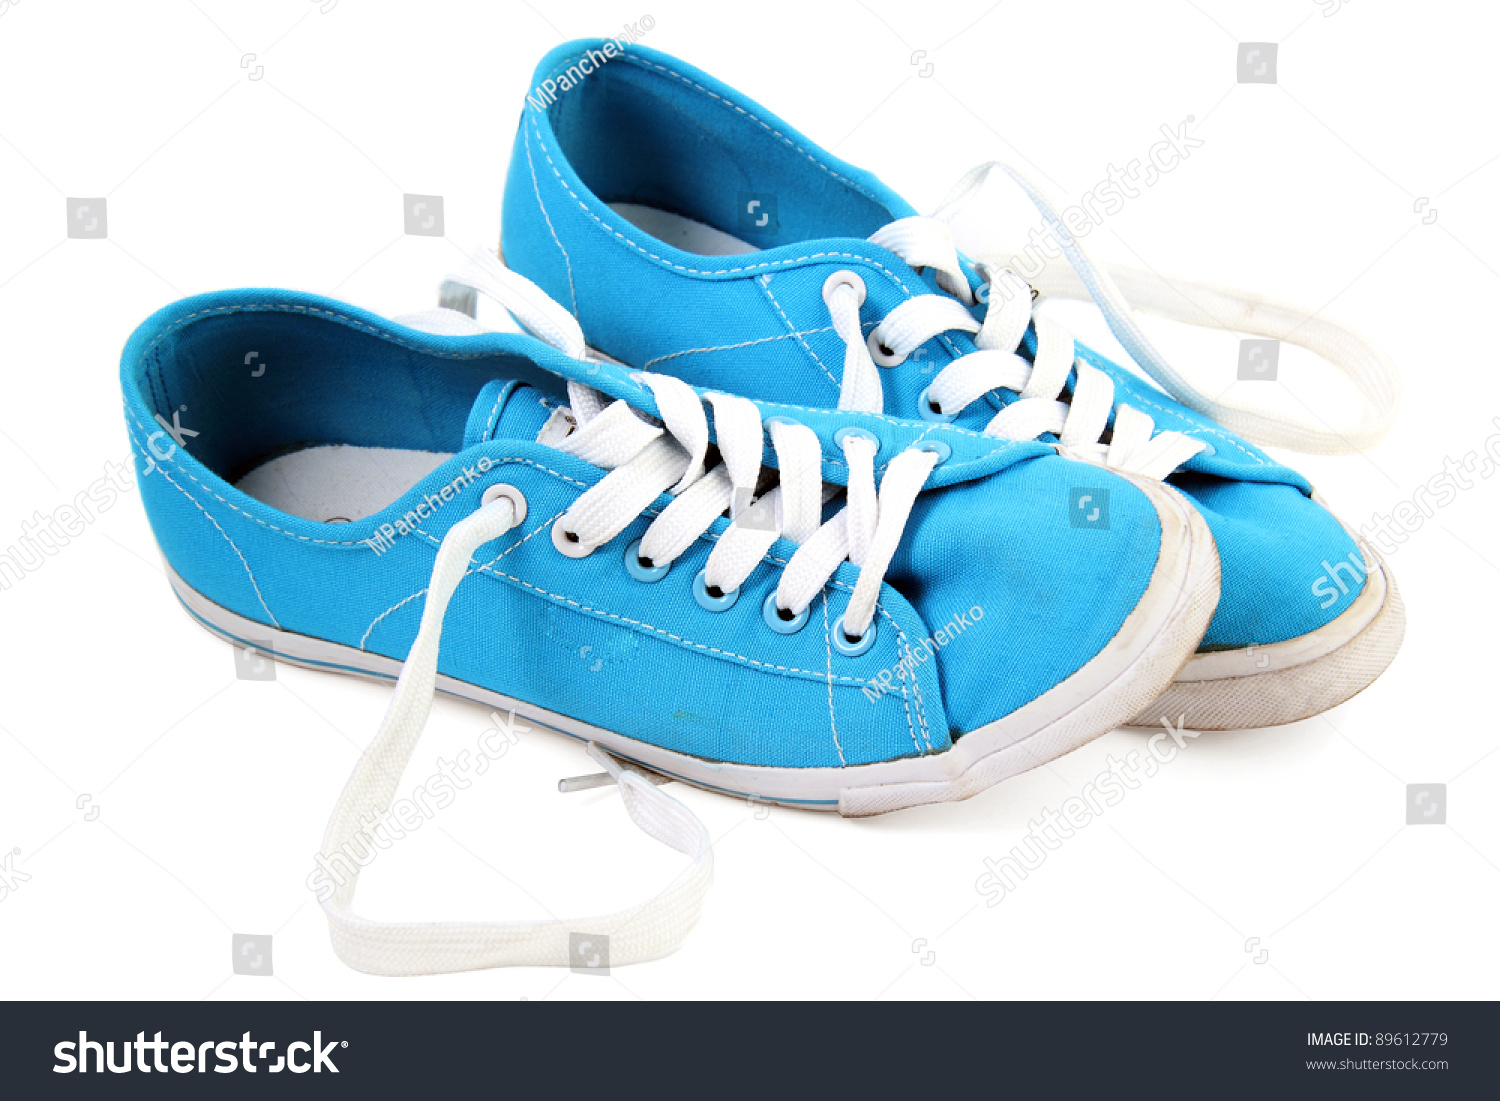 Blue Sneaker On A White Background Stock Photo 89612779 : Shutterstock